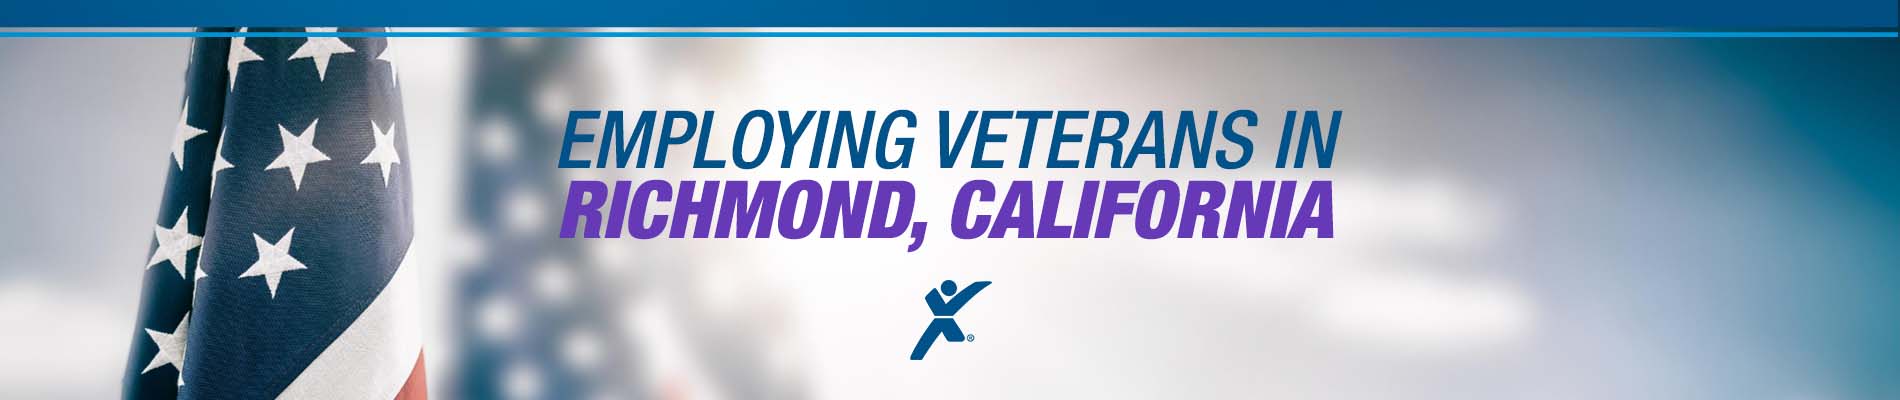 Express Richmond Hires Vets in Contra Costa County